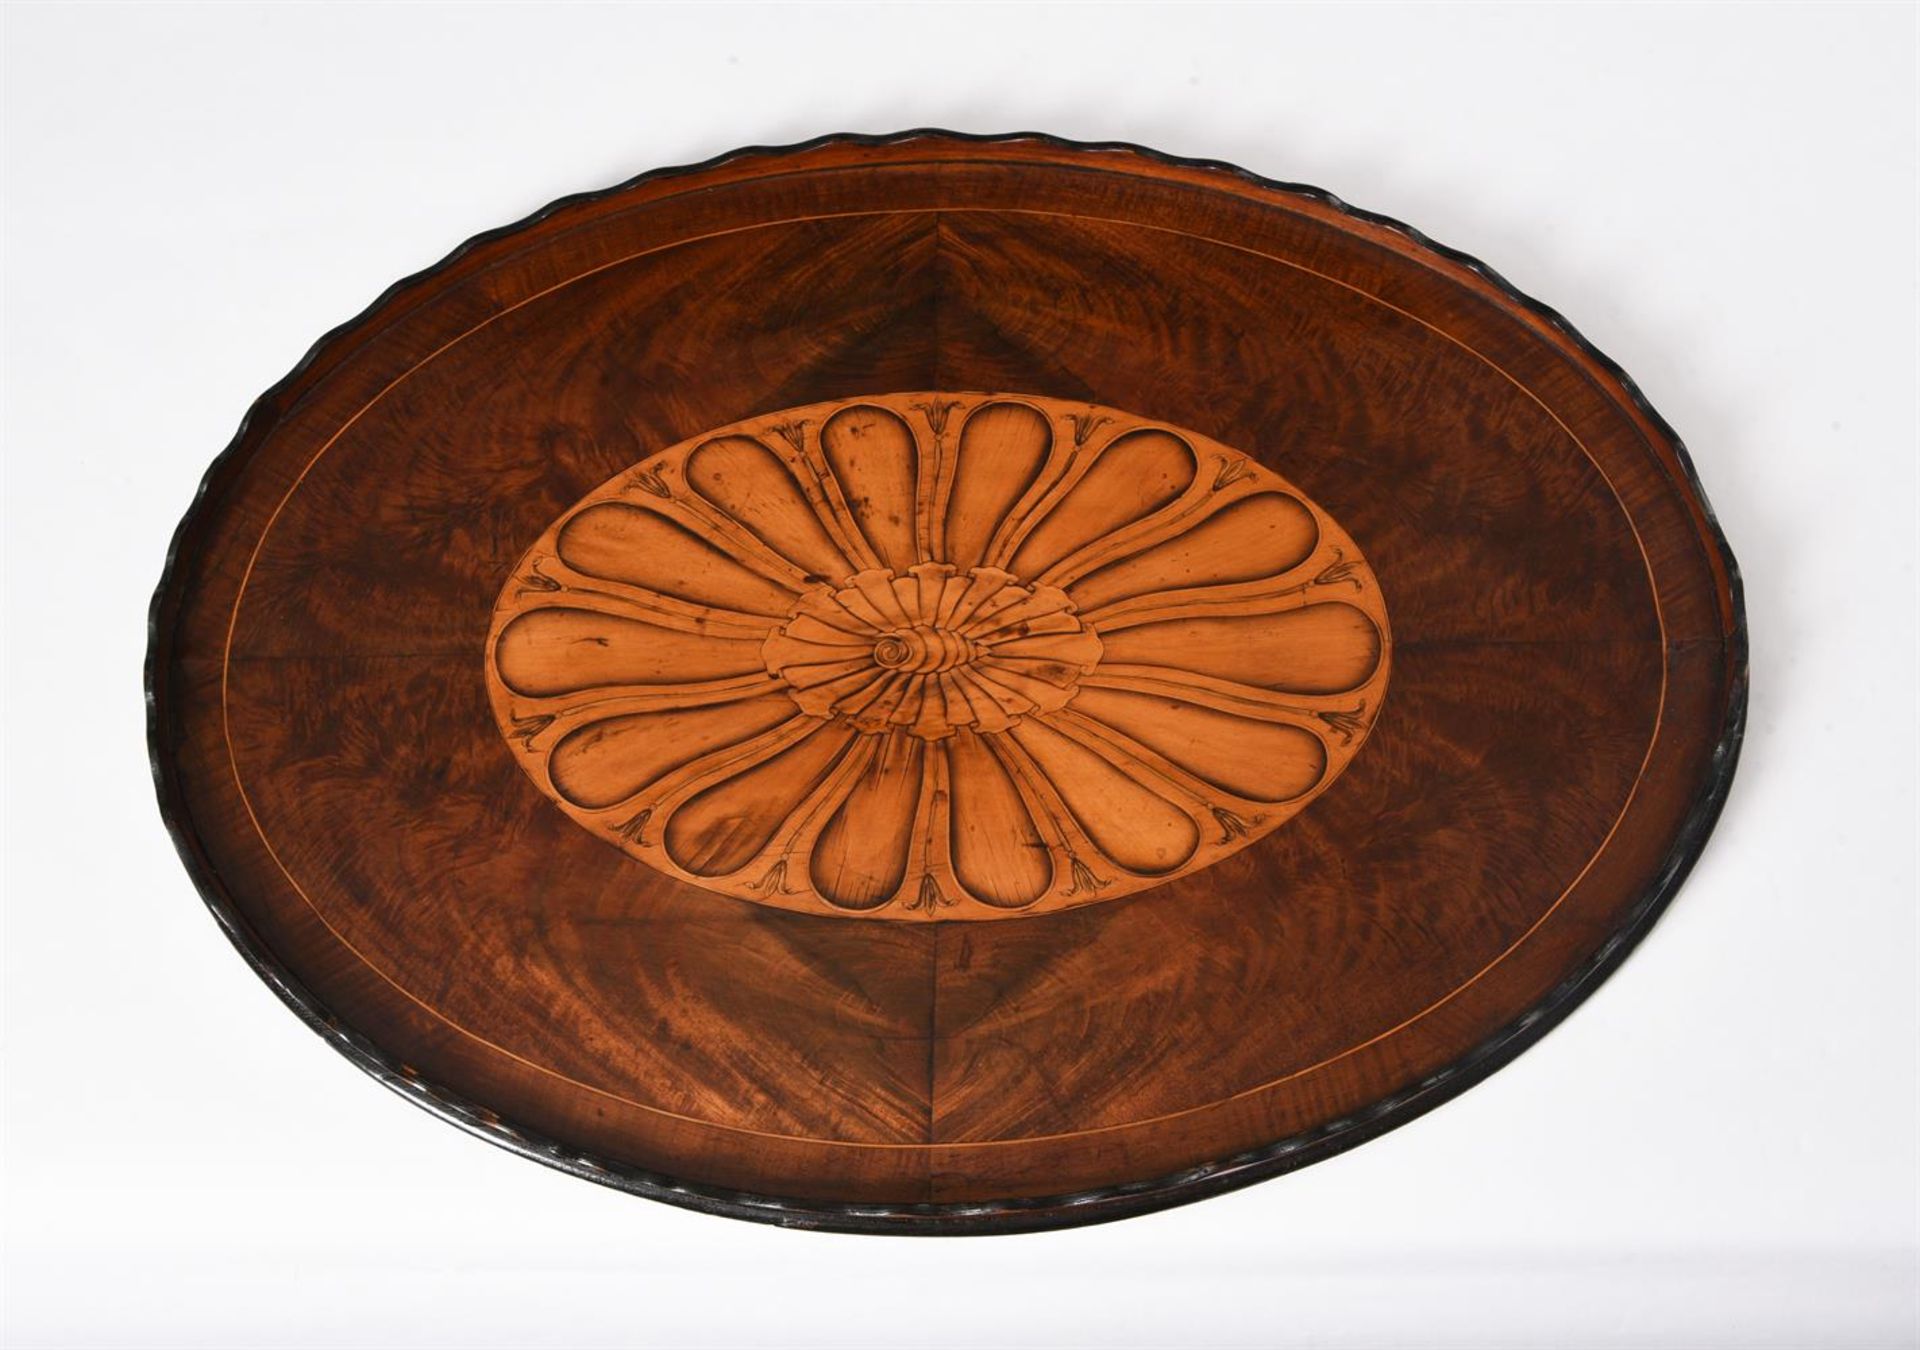 A GEORGE III FIGURED MAHOGANY, CROSSBANDED AND INLAID OVAL TRAY, CIRCA 1800 - Image 2 of 2